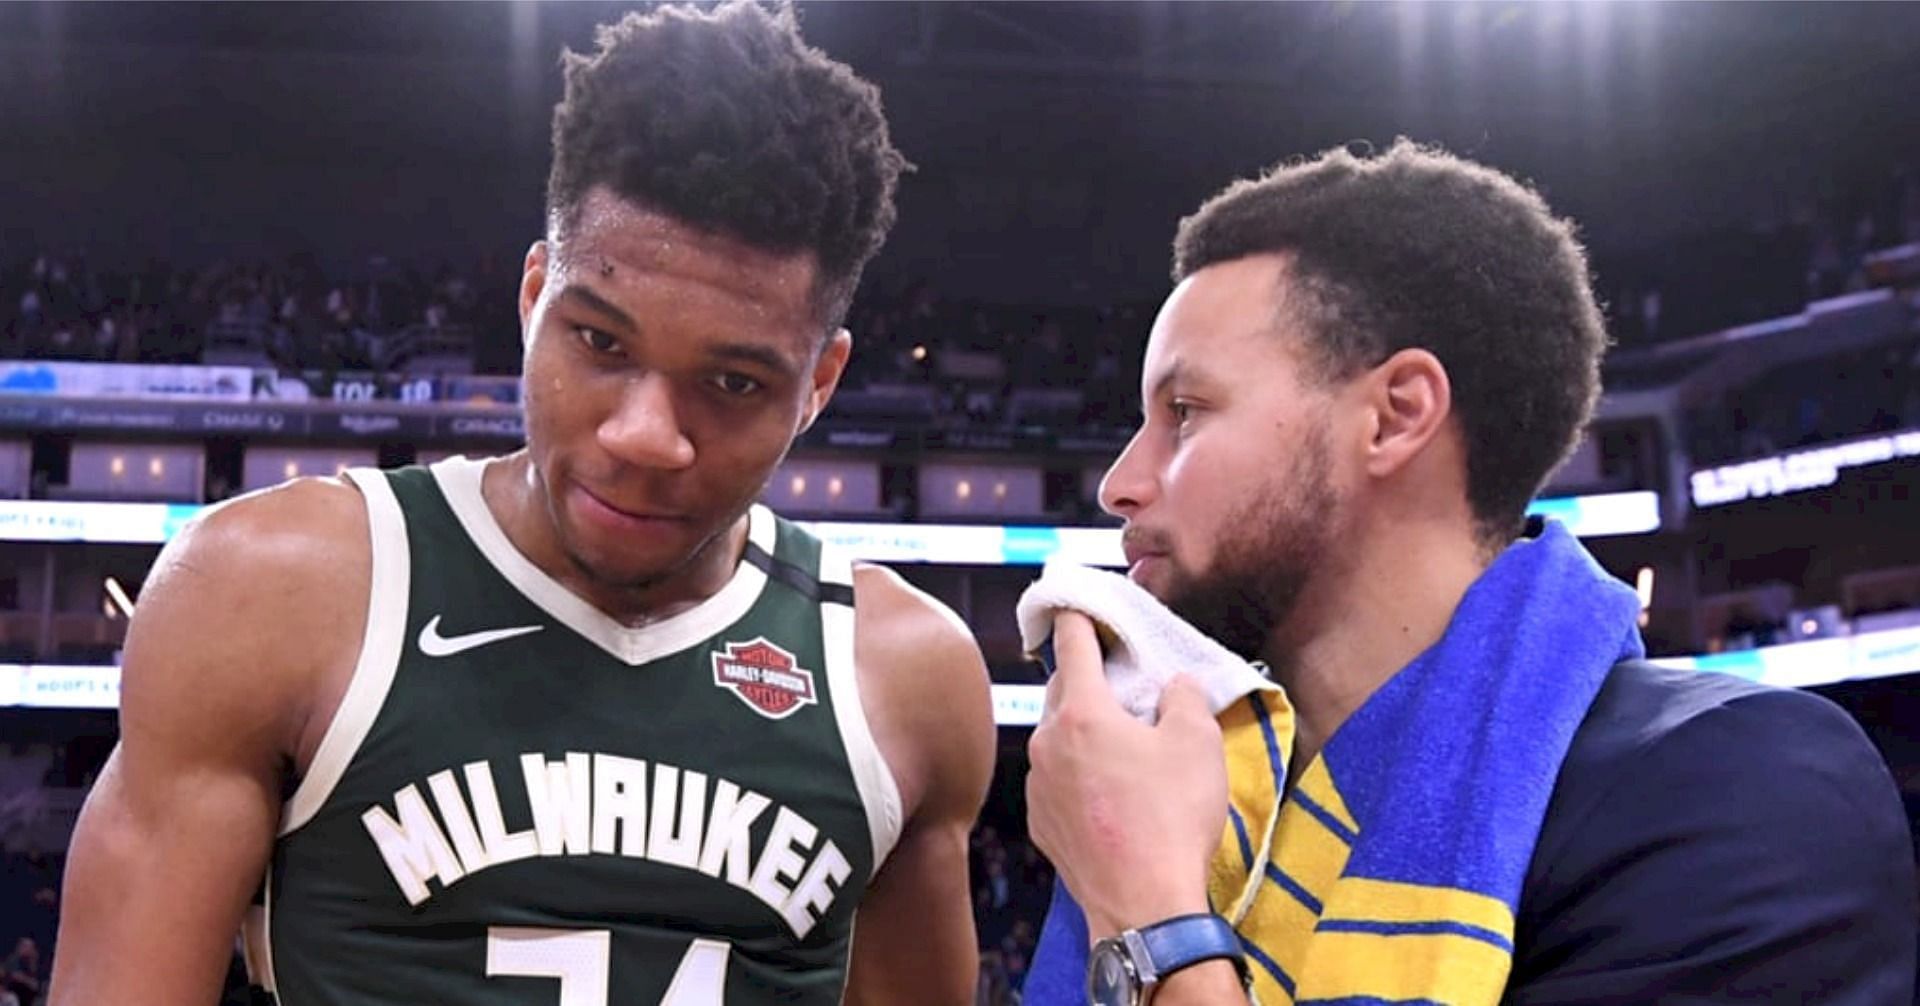 NBA superstars Giannis Antetokounmpo and Steph Curry